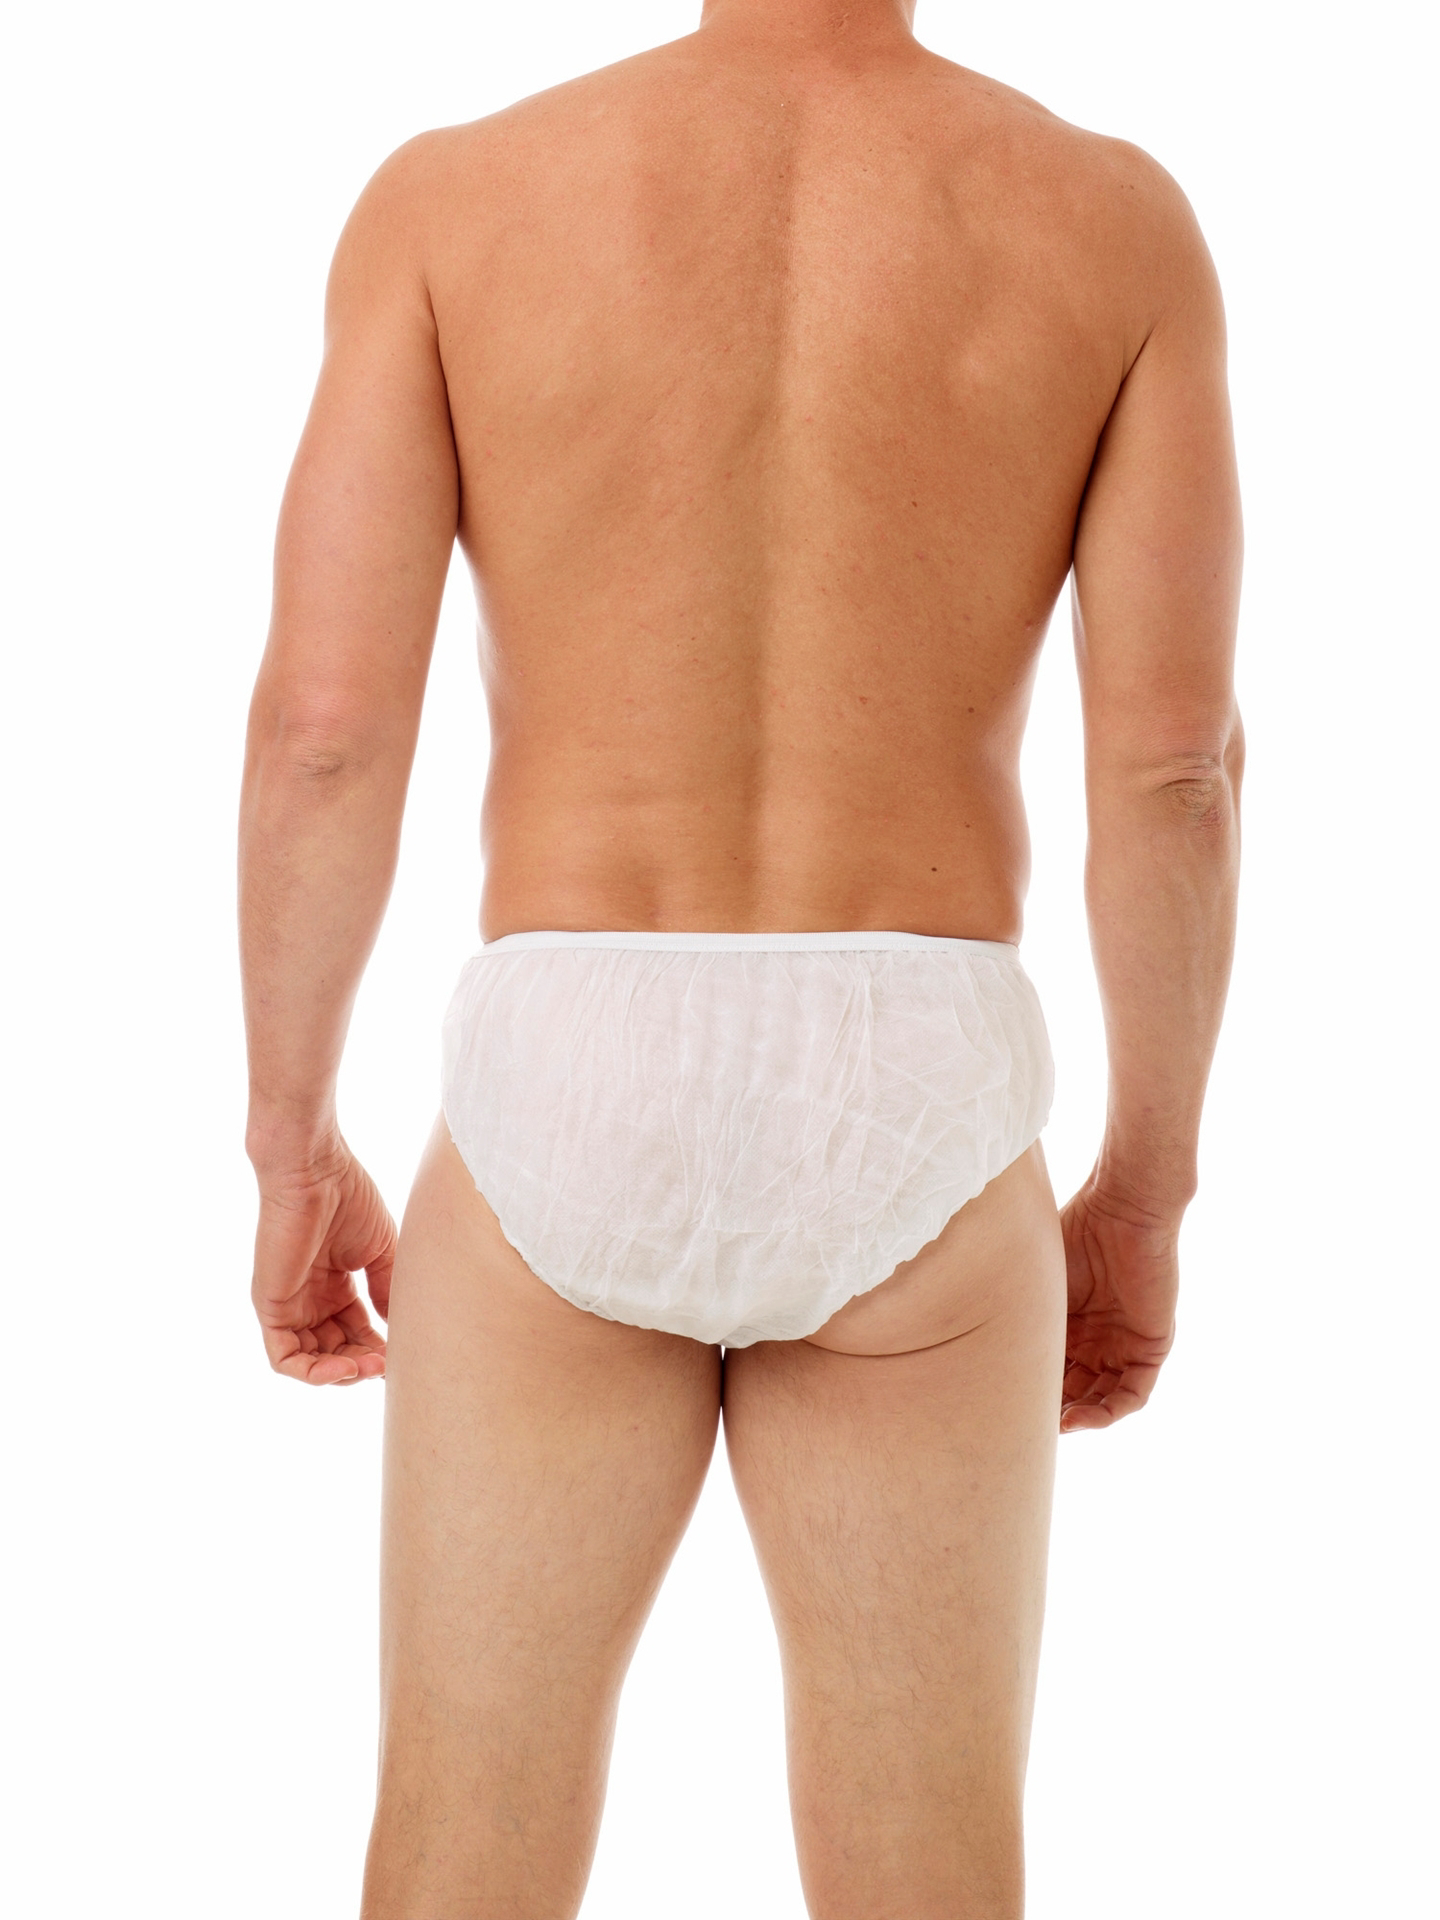 https://www.underworks.com/images/thumbs/0001171_mens-disposable-briefs-10-pack.jpeg